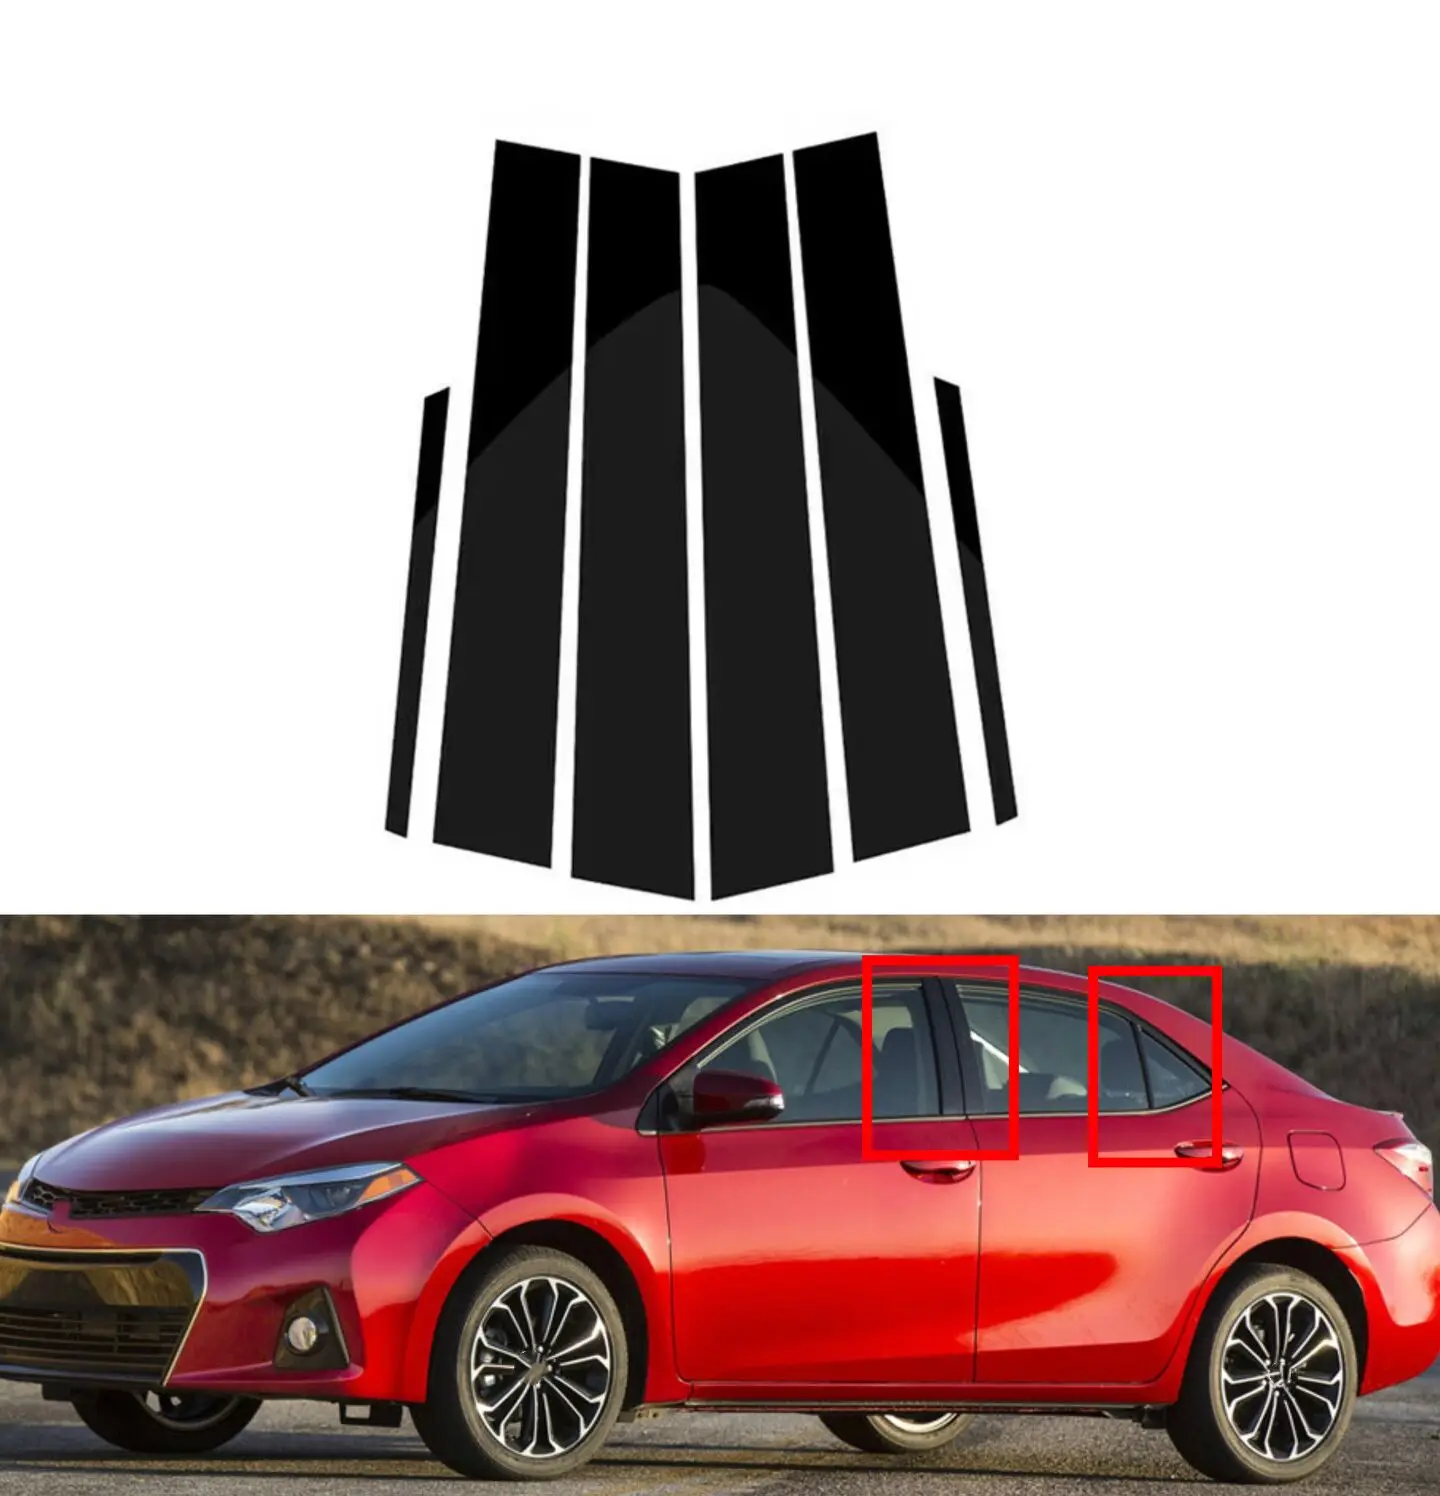 

6Pcs Gloss Black Pillar Posts For Toyota Corolla 2014 2015 2016 2017 2018 Window Side Door Trim Decal Cover Accessories